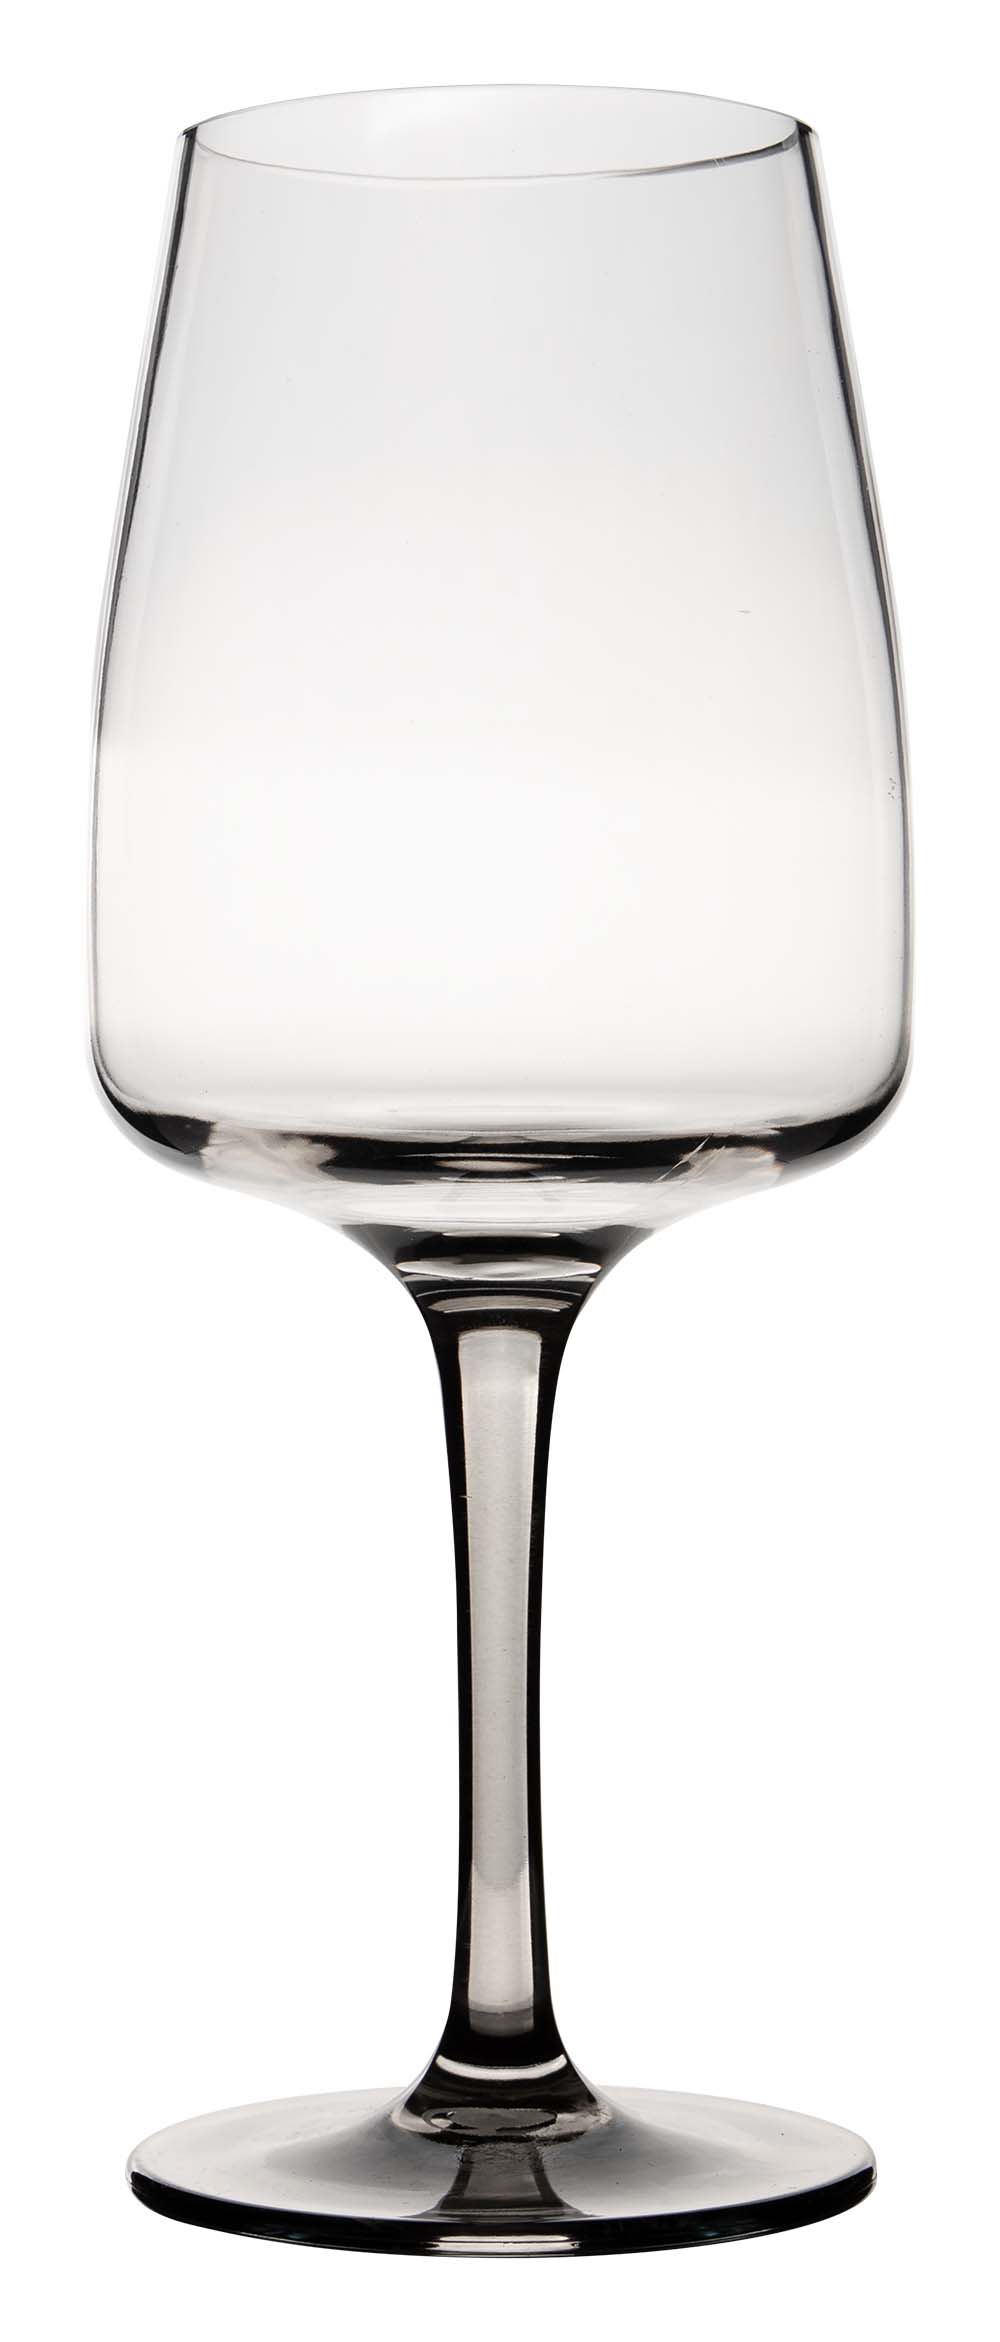 6912181 A stylish wine glass from the Vivid line collection. The smoke effect gives the wine glass a modern appearance. Virtually unbreakable due to high-quality MS material. Comes in a set of 2 pieces. Very easy to clean and long-lasting, making the glass highly durable. Additionally, the wine glass is very lightweight, scratch-resistant, and BPA-free. Capacity: 470 ml.